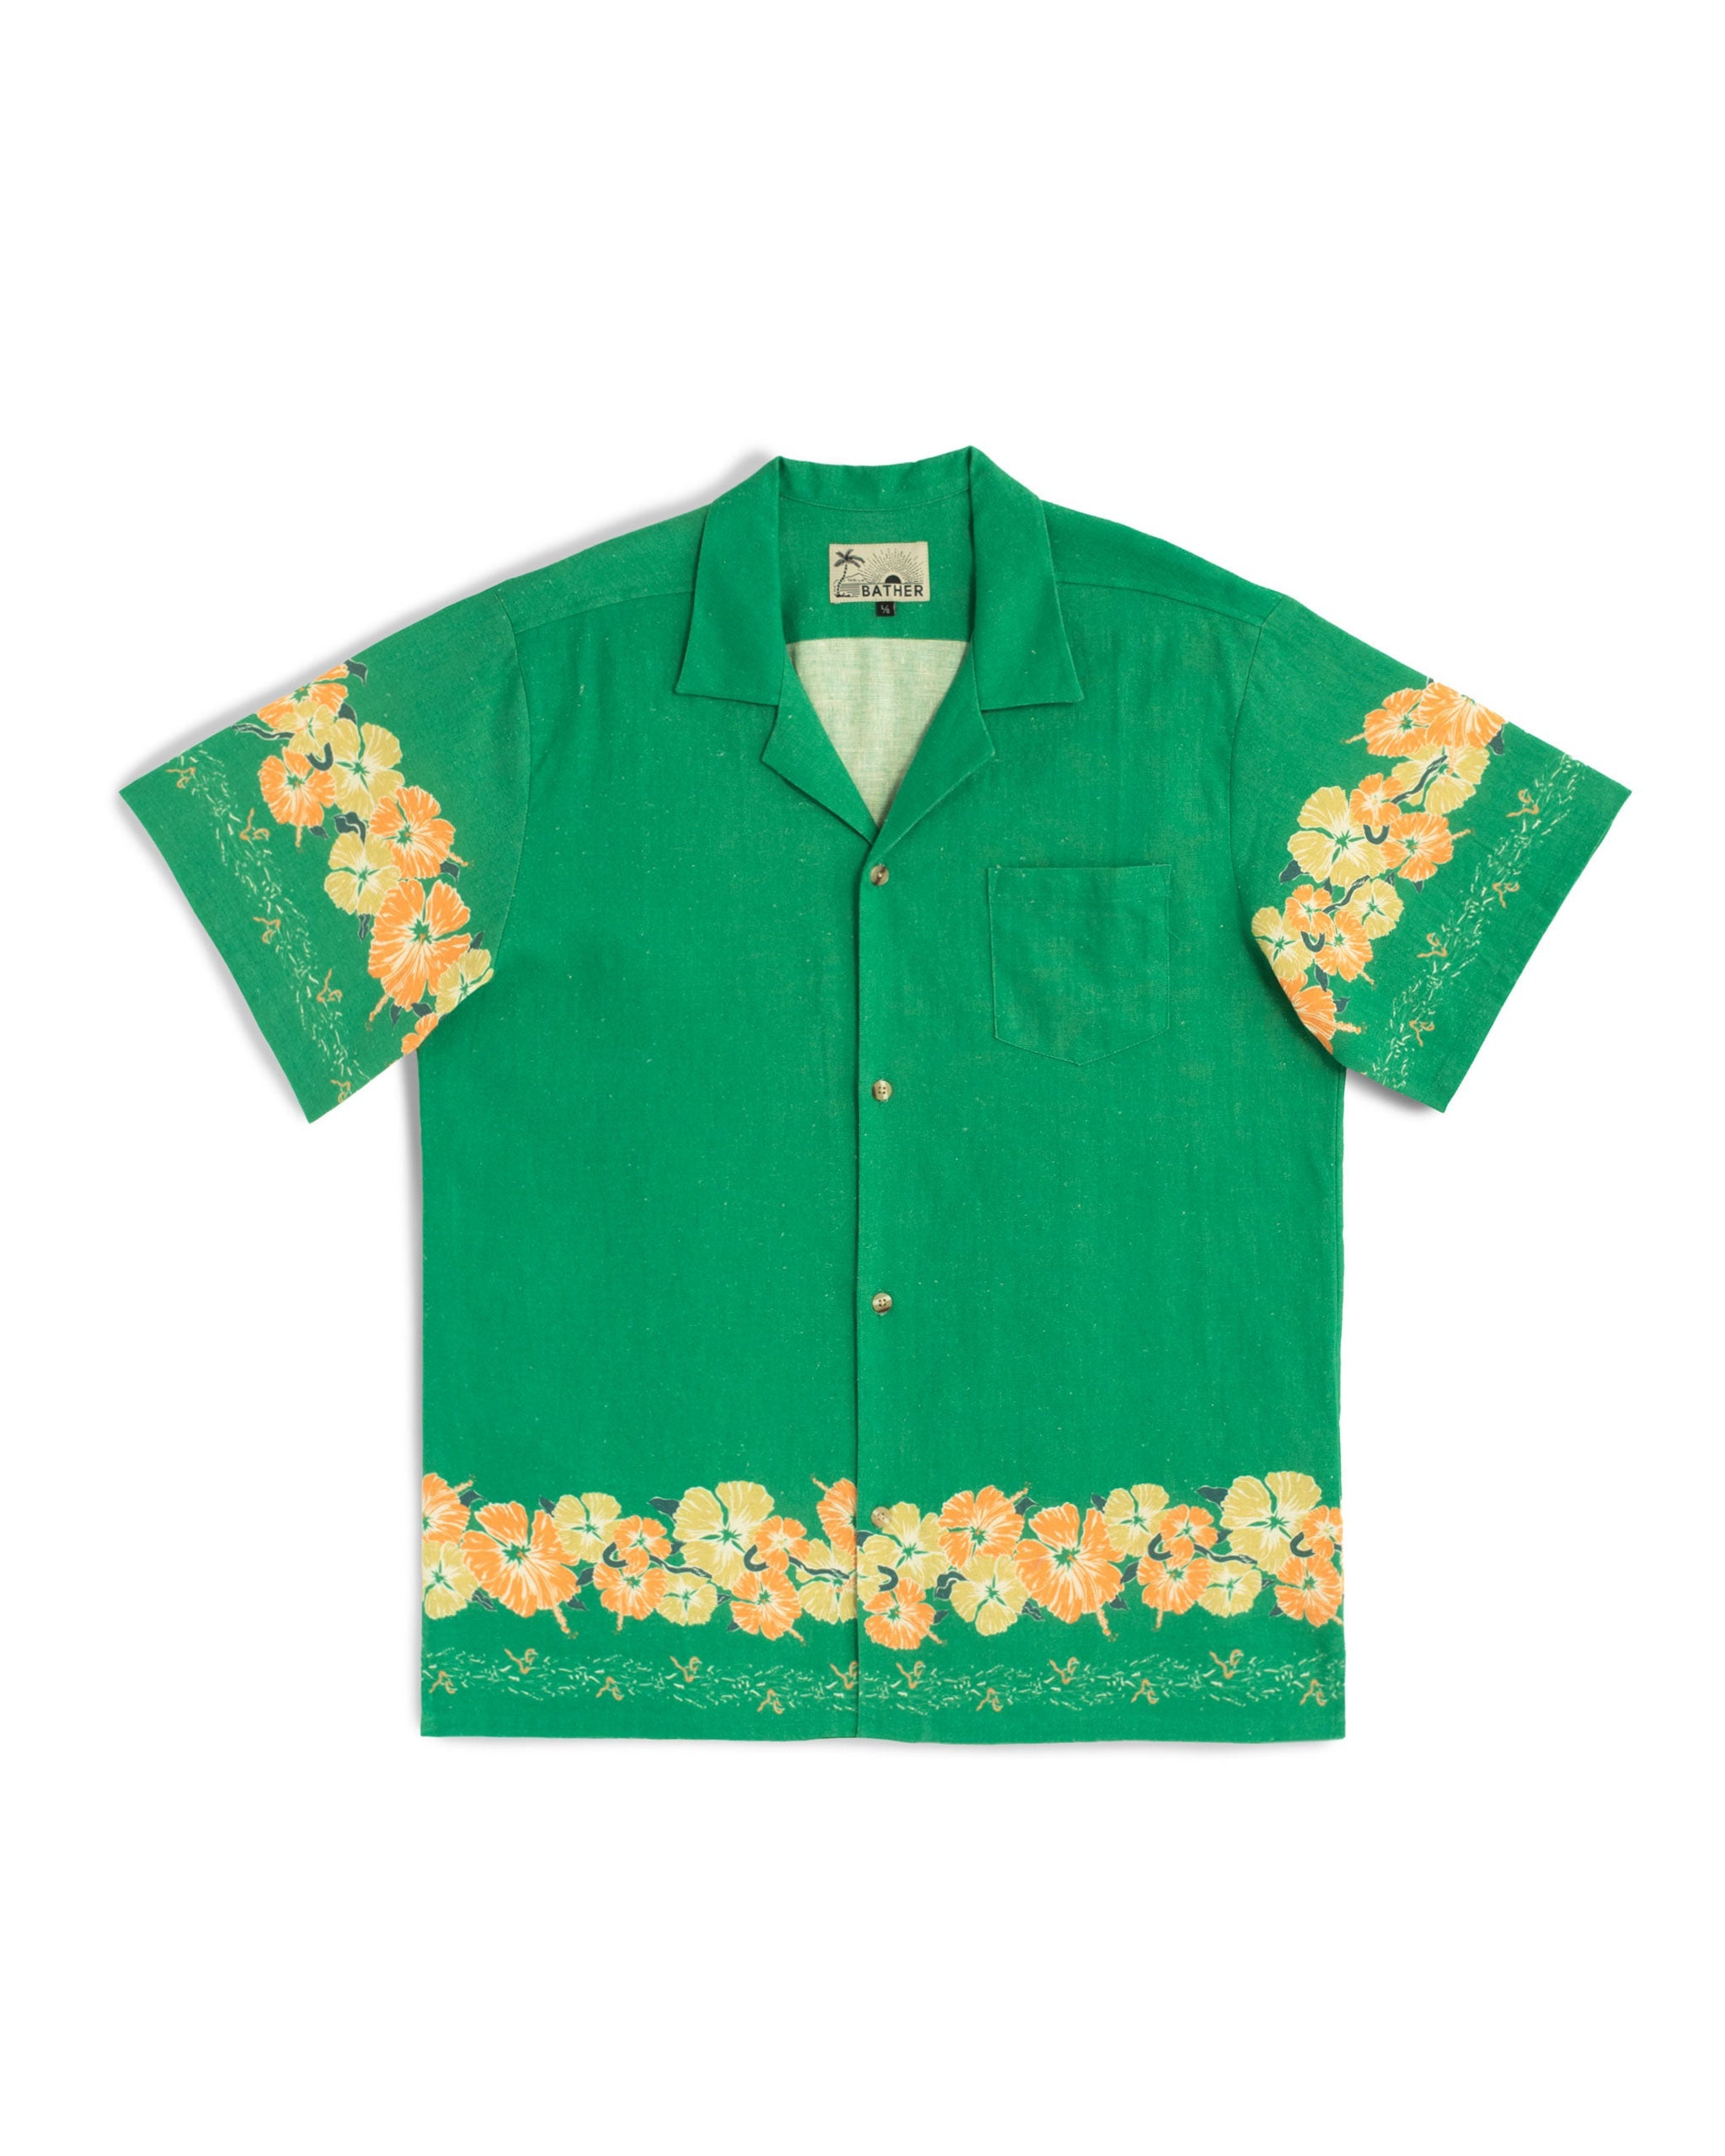 Green camp shirt with floral motif pattern on the sleeves and bottom hem